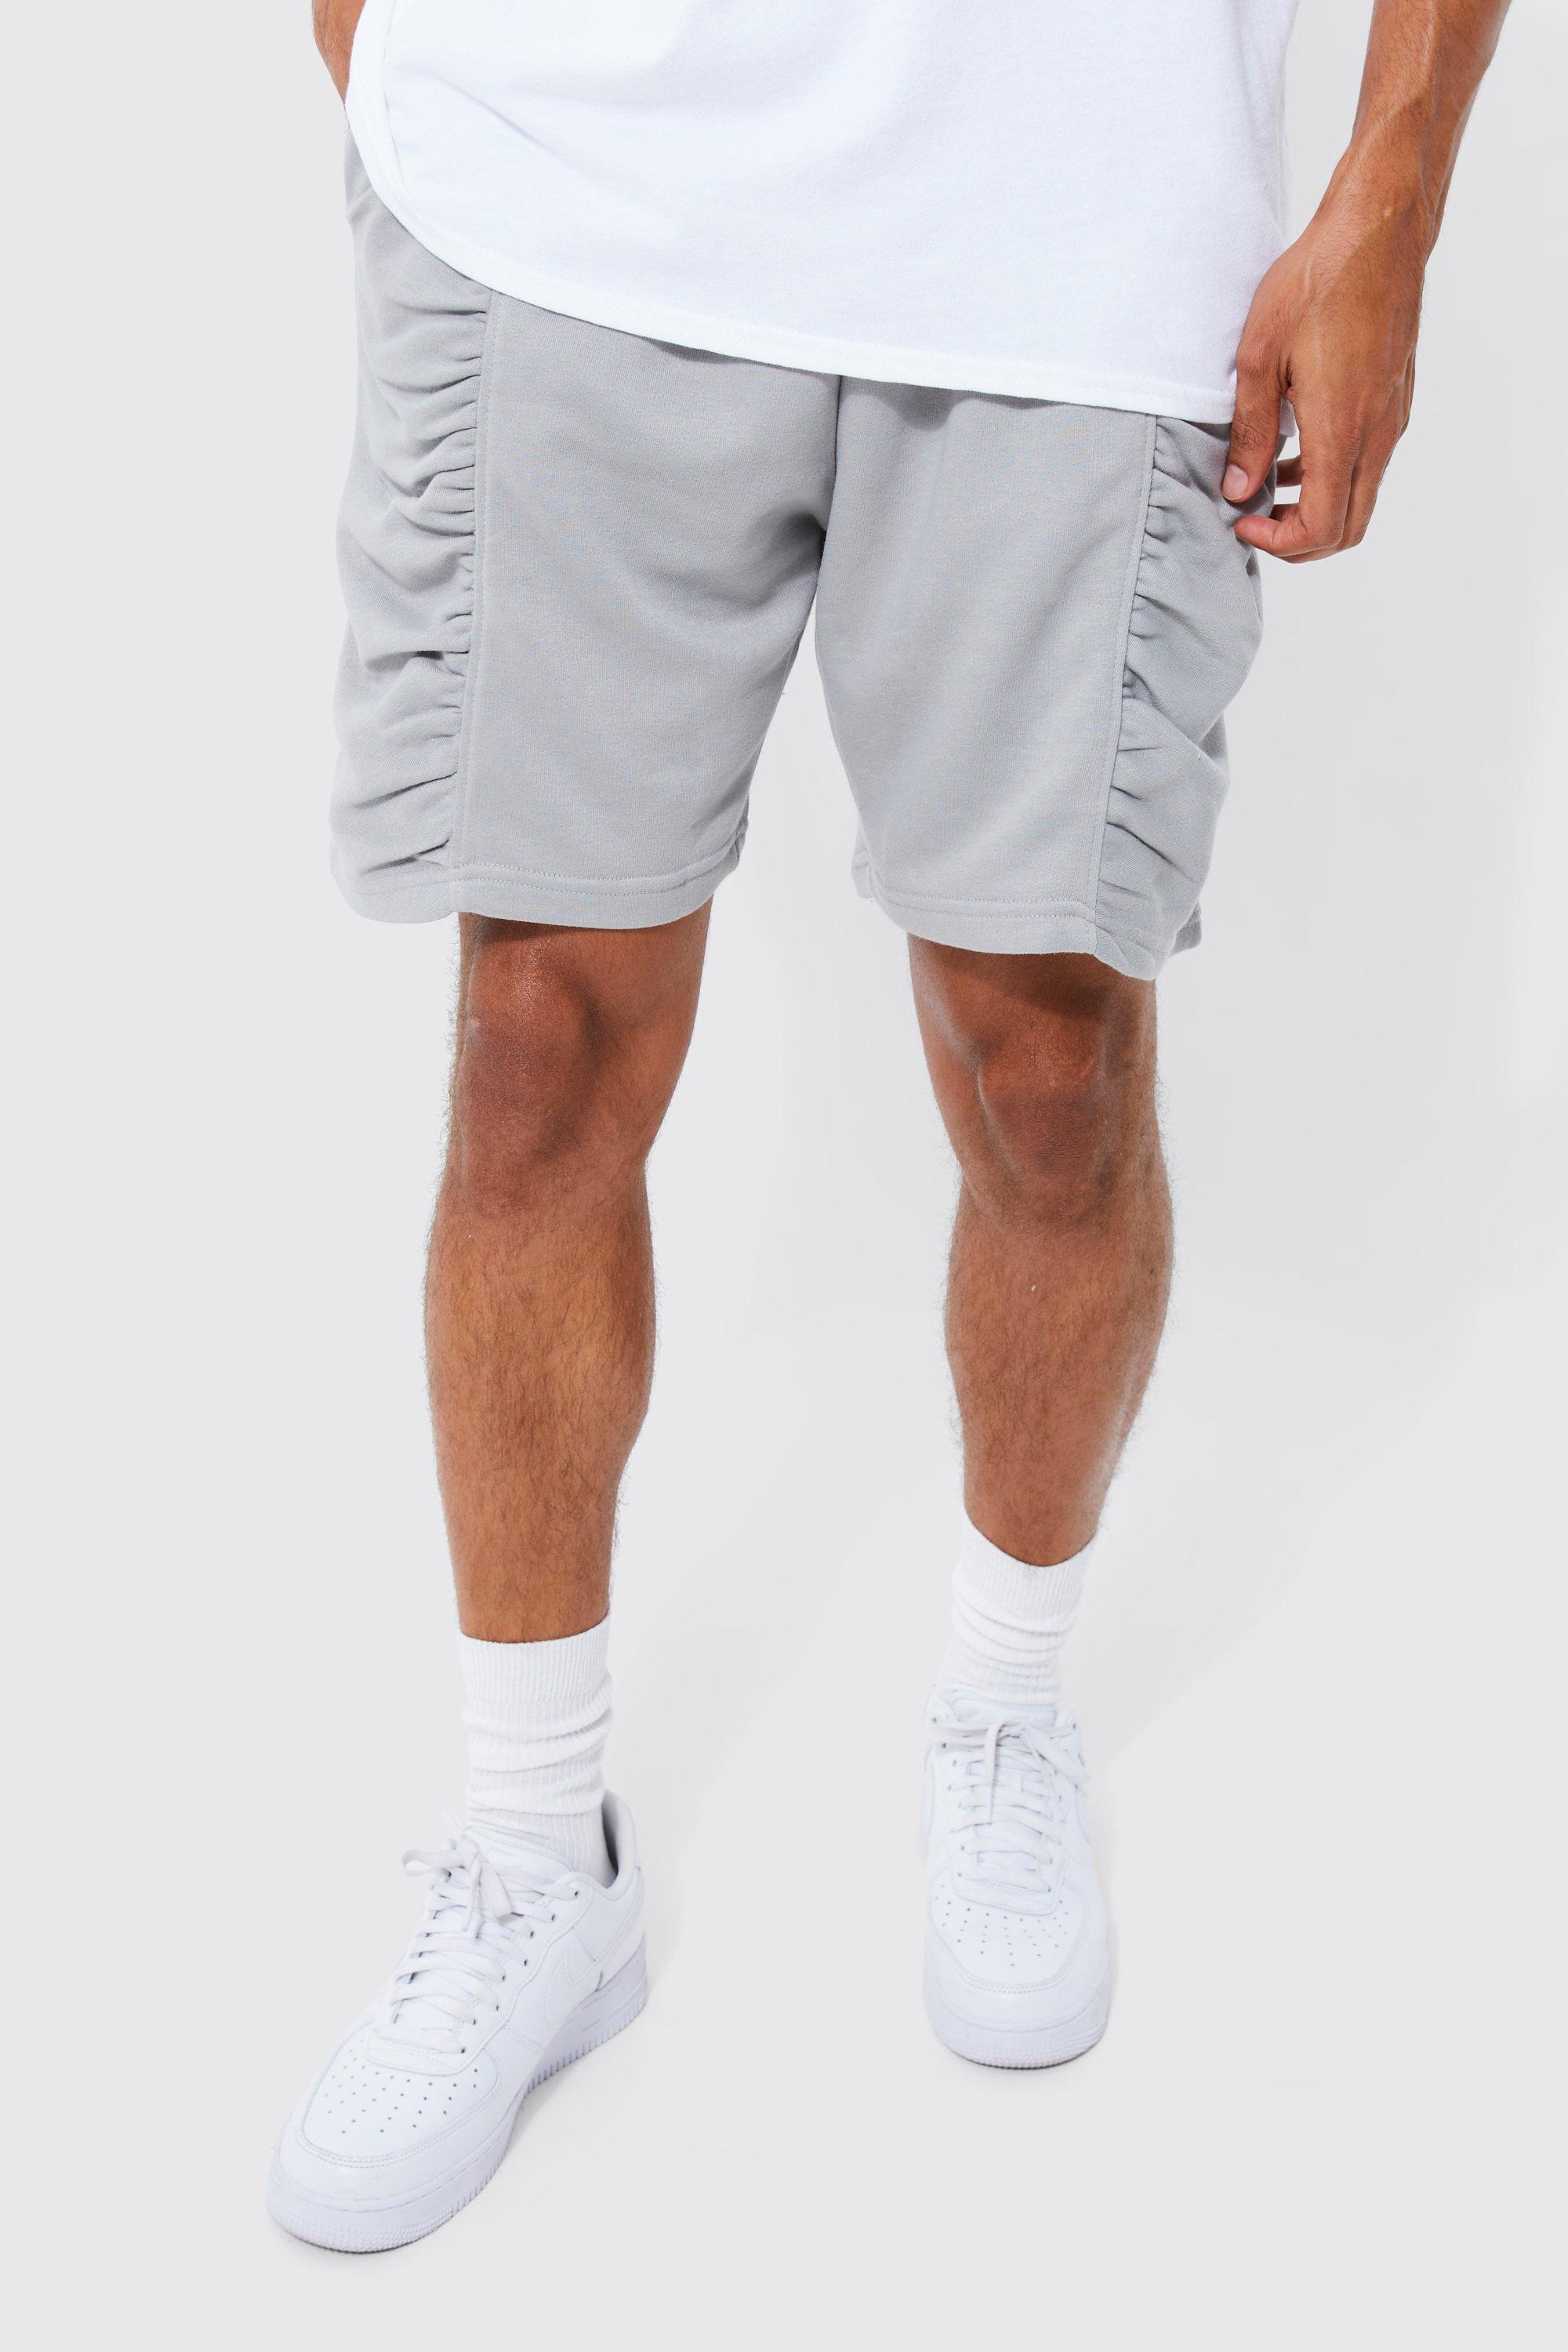 boohooMAN Relaxed Fit Contrast Gusset Jersey Short - Black - Size XS